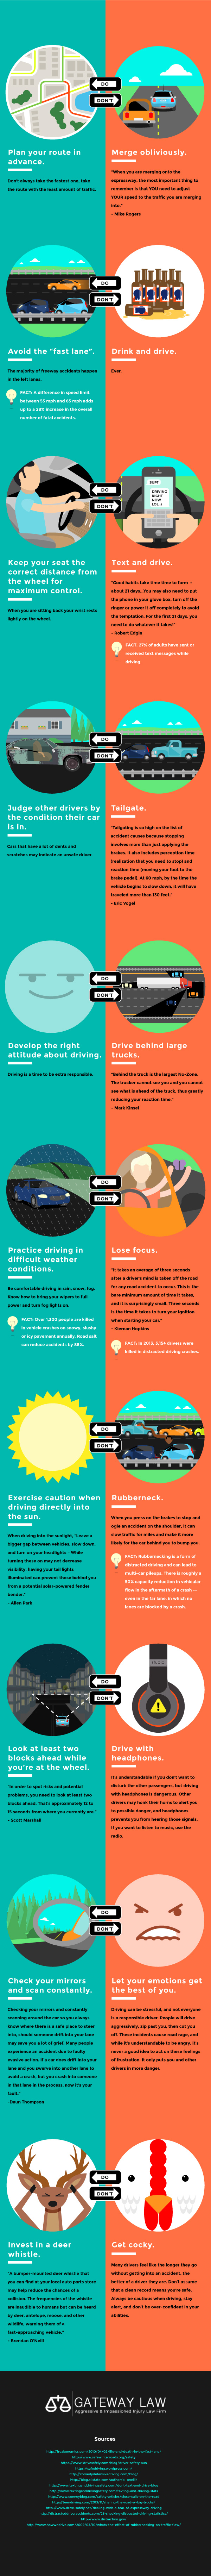 The Do's and Don'ts of Driving